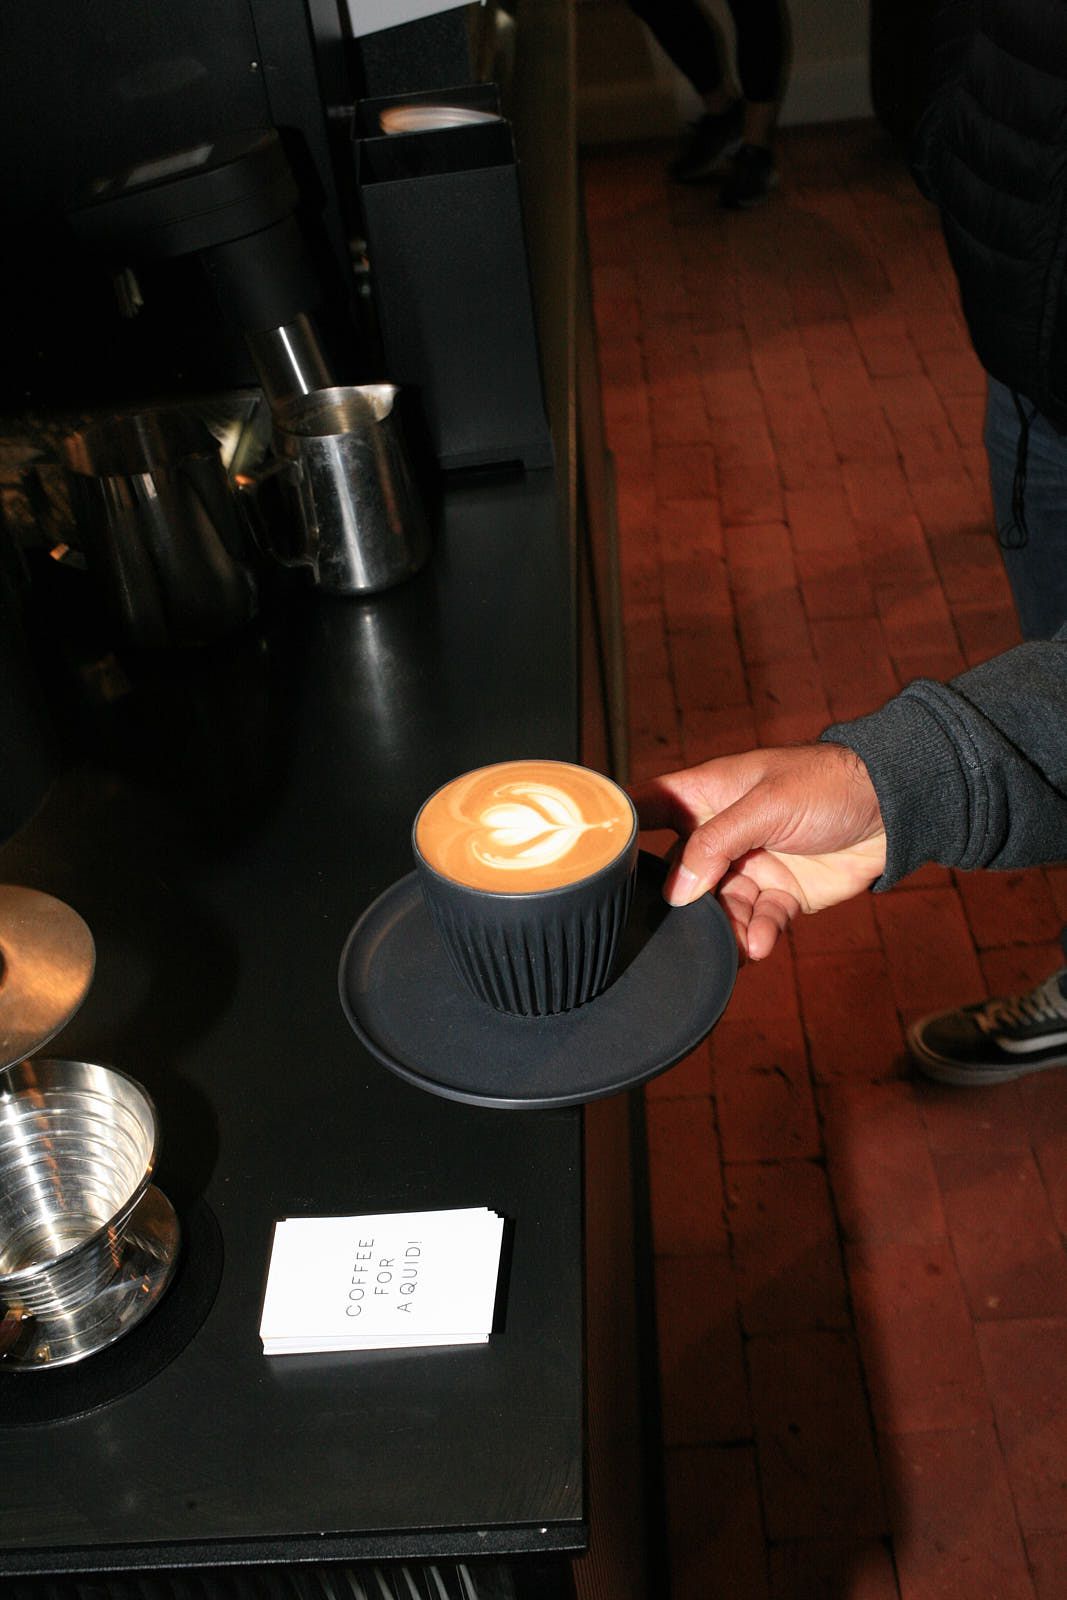 A hand picks up a flat white coffee in a black cup, the drink adorned with a latte art heart.